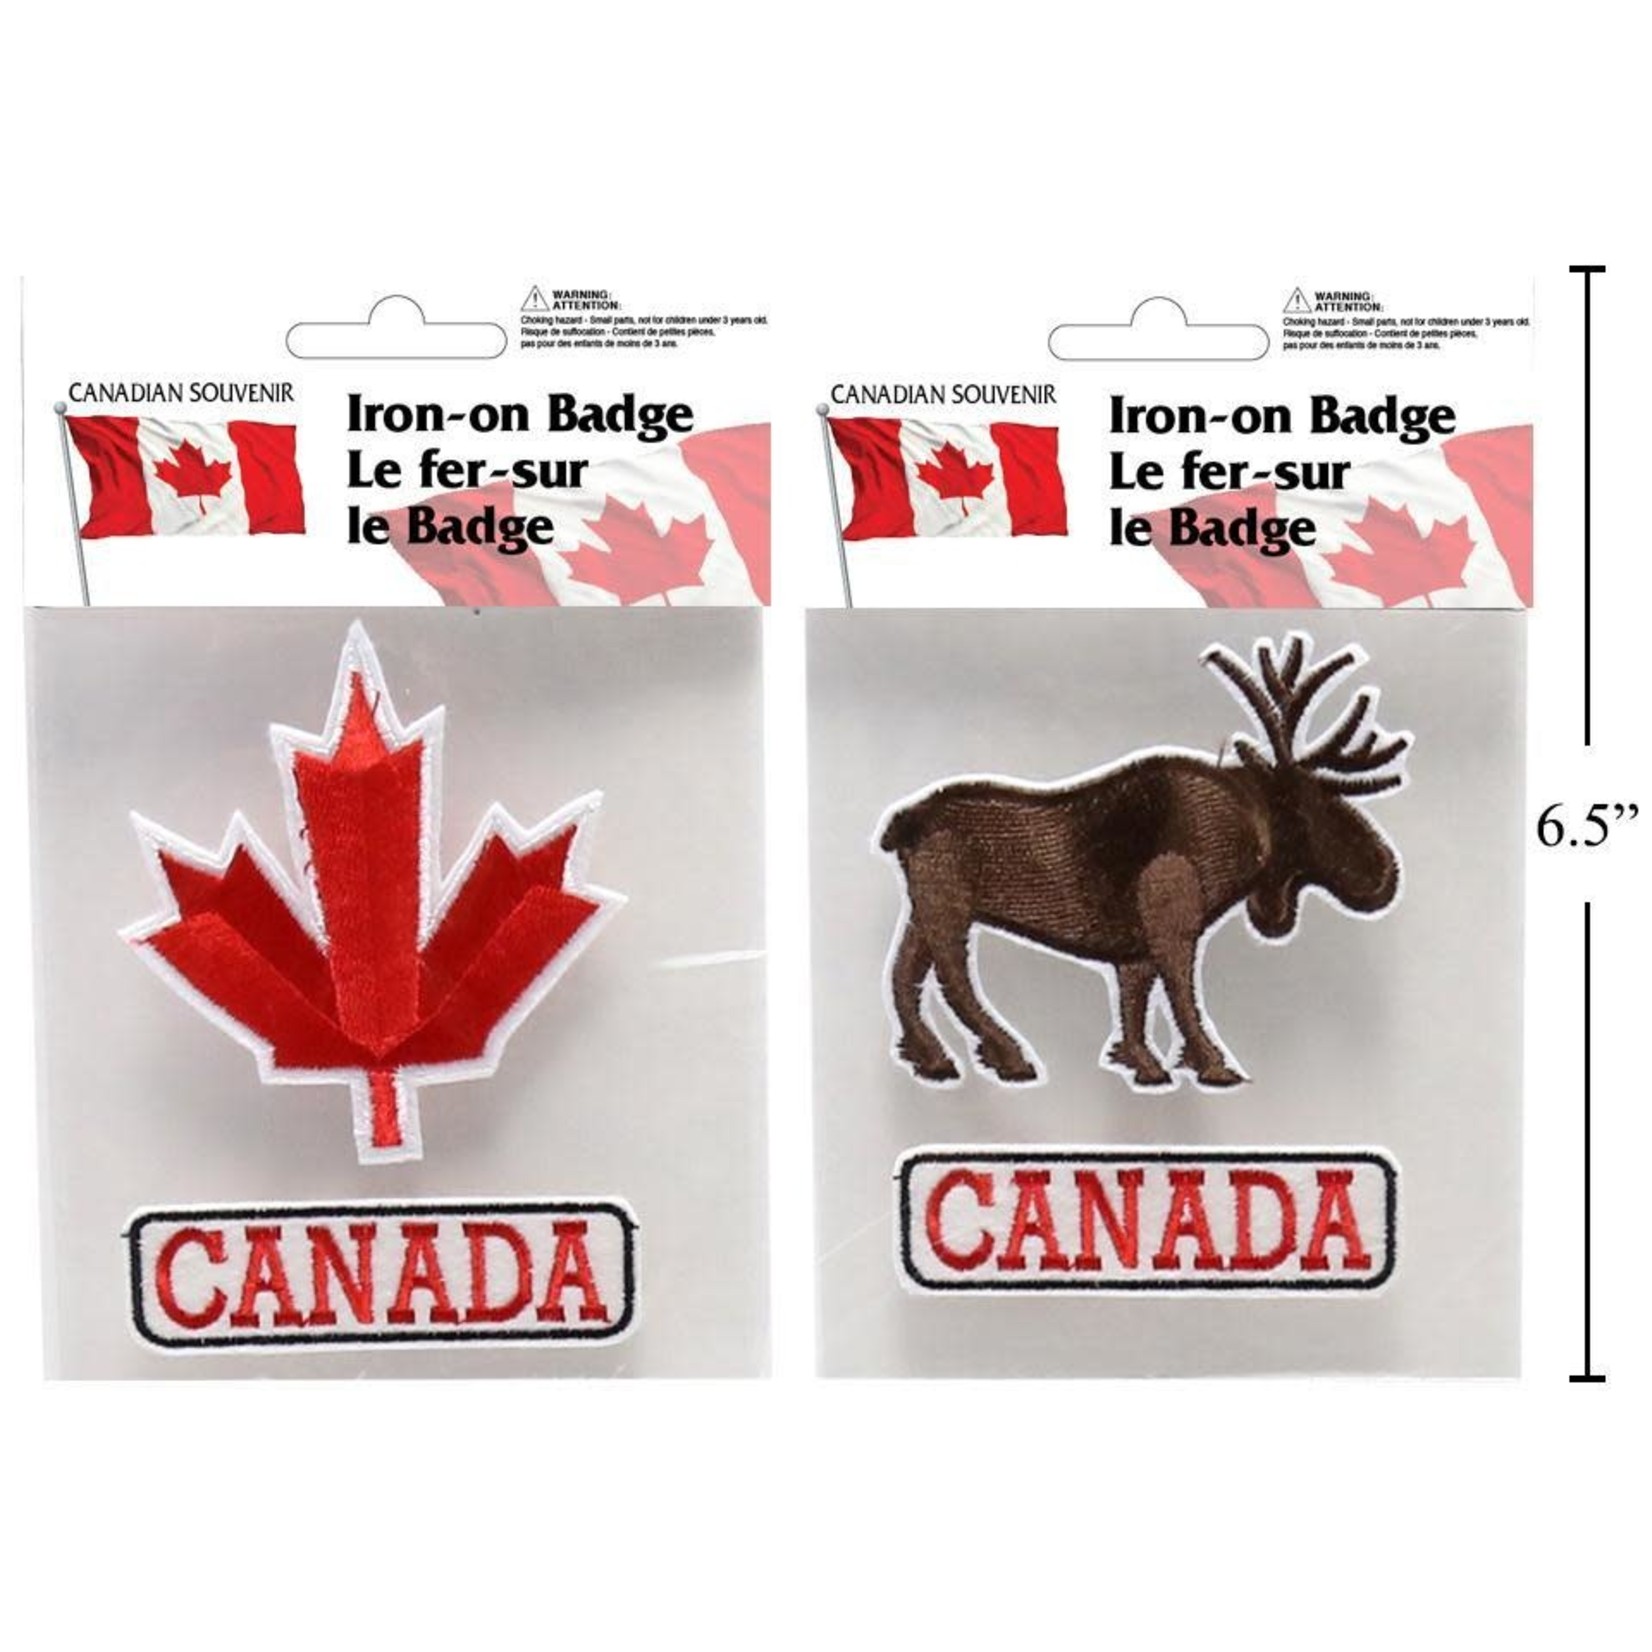 CANADA ADHESIVE PATCHES